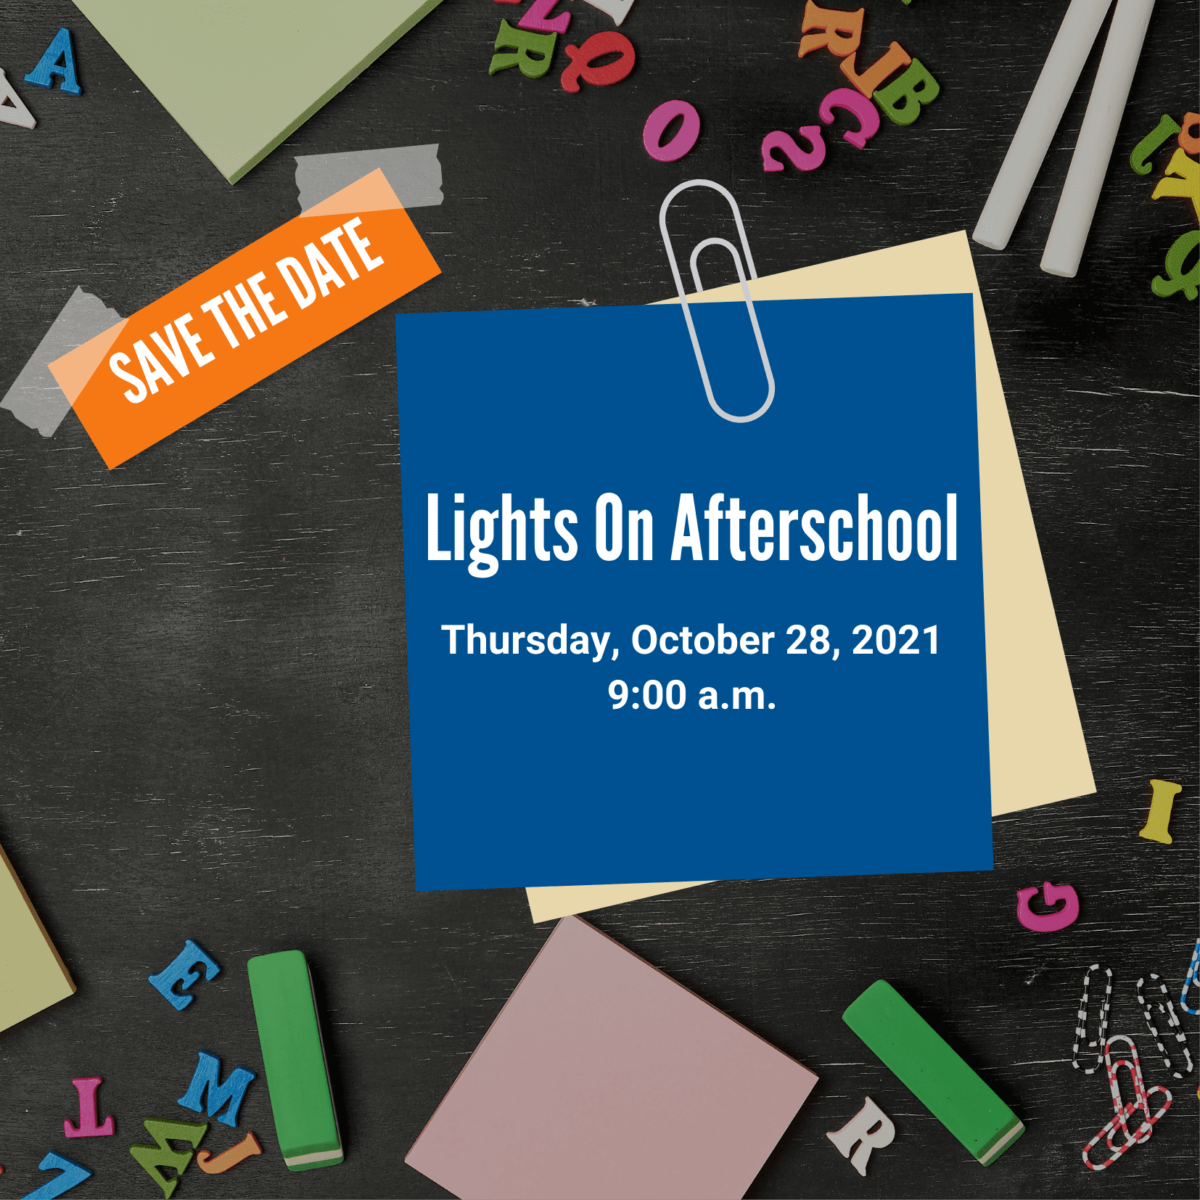 Save-the-date for Lights On Afterschool